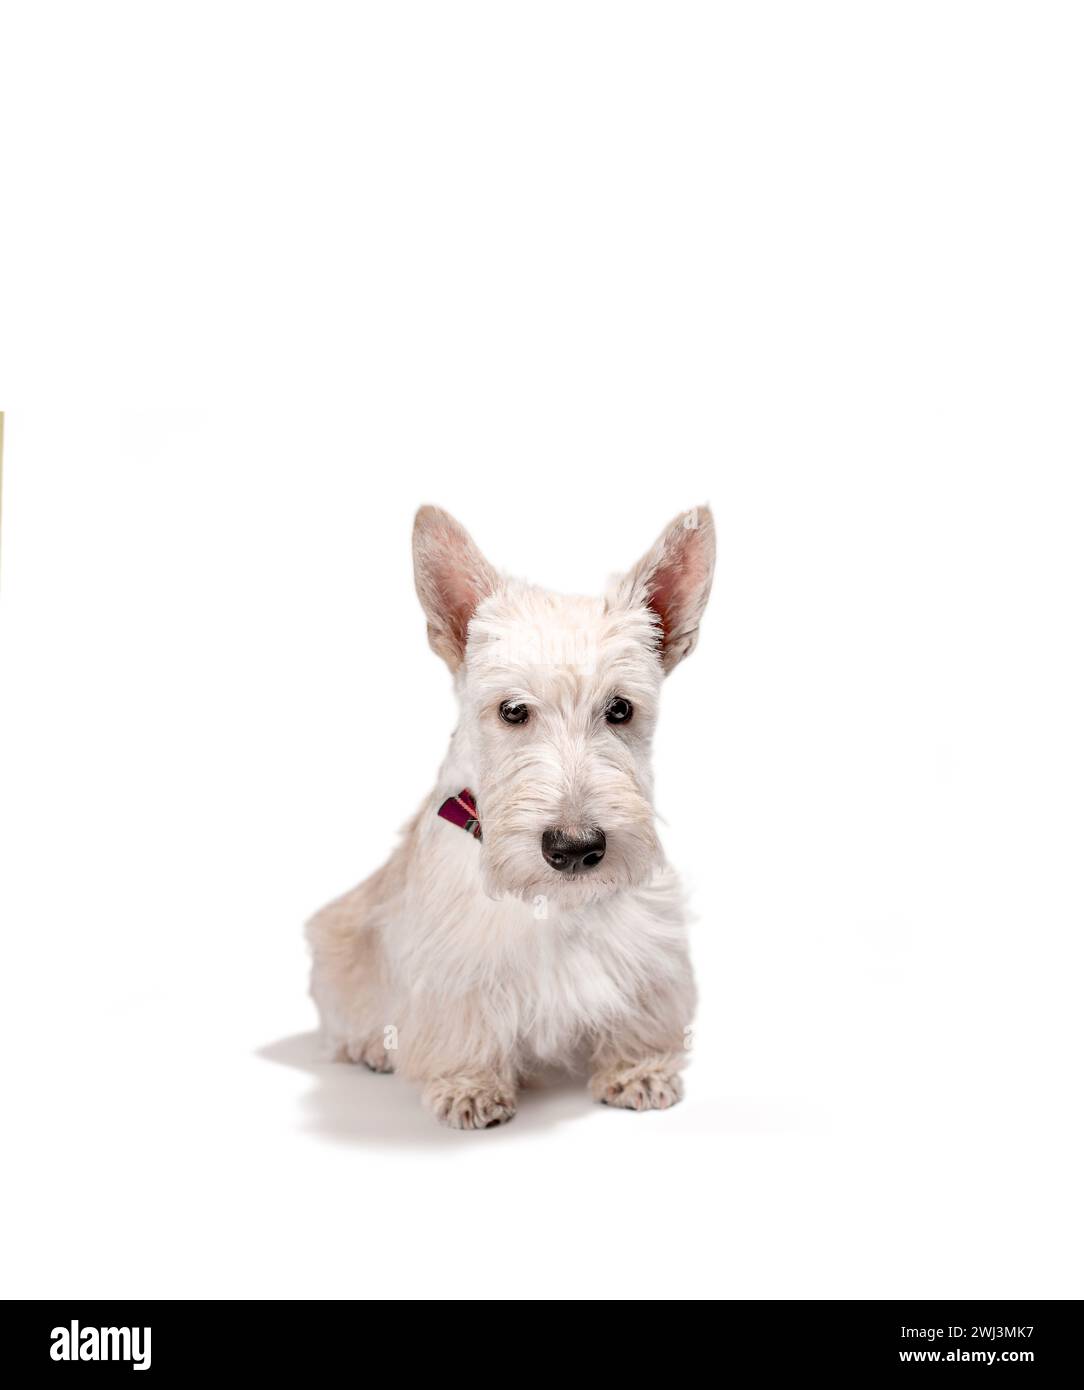 White scottish terrier puppy on a light background Stock Photo